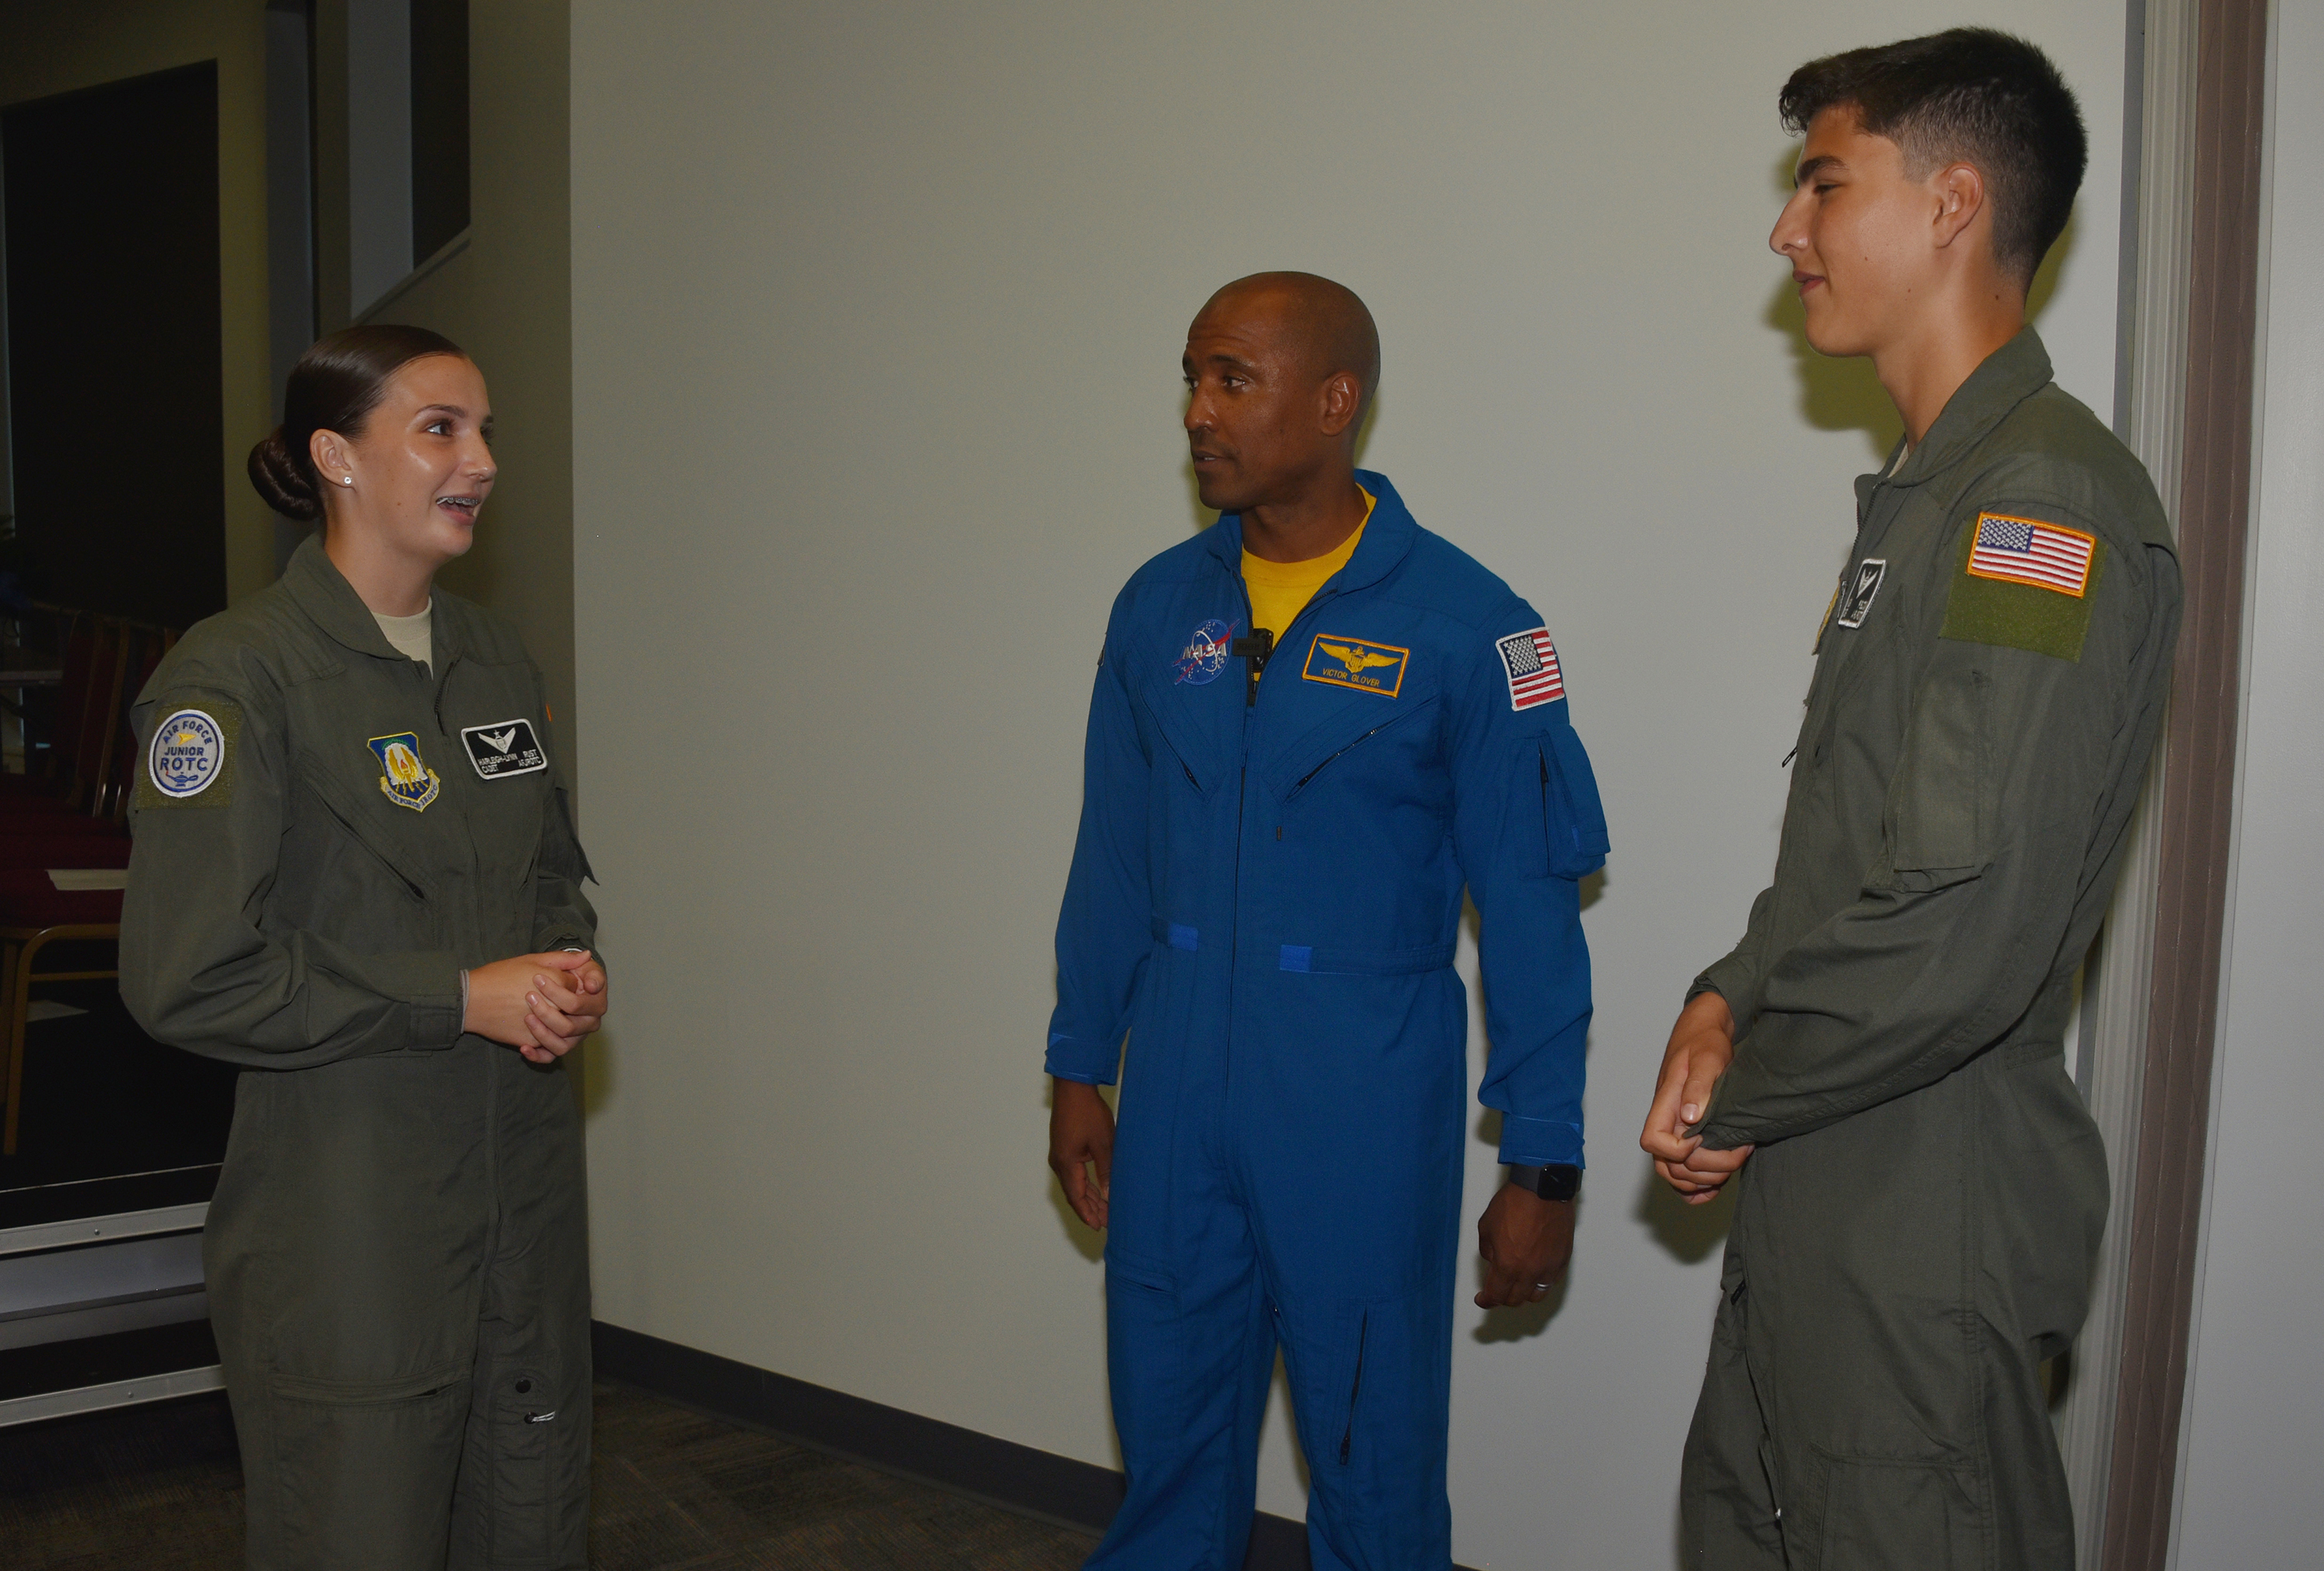 Delaware cadets Harleigh-Lynn Rust (l) and Hayden Pelton chat with Cmdr Victor J. Glover, Jr.